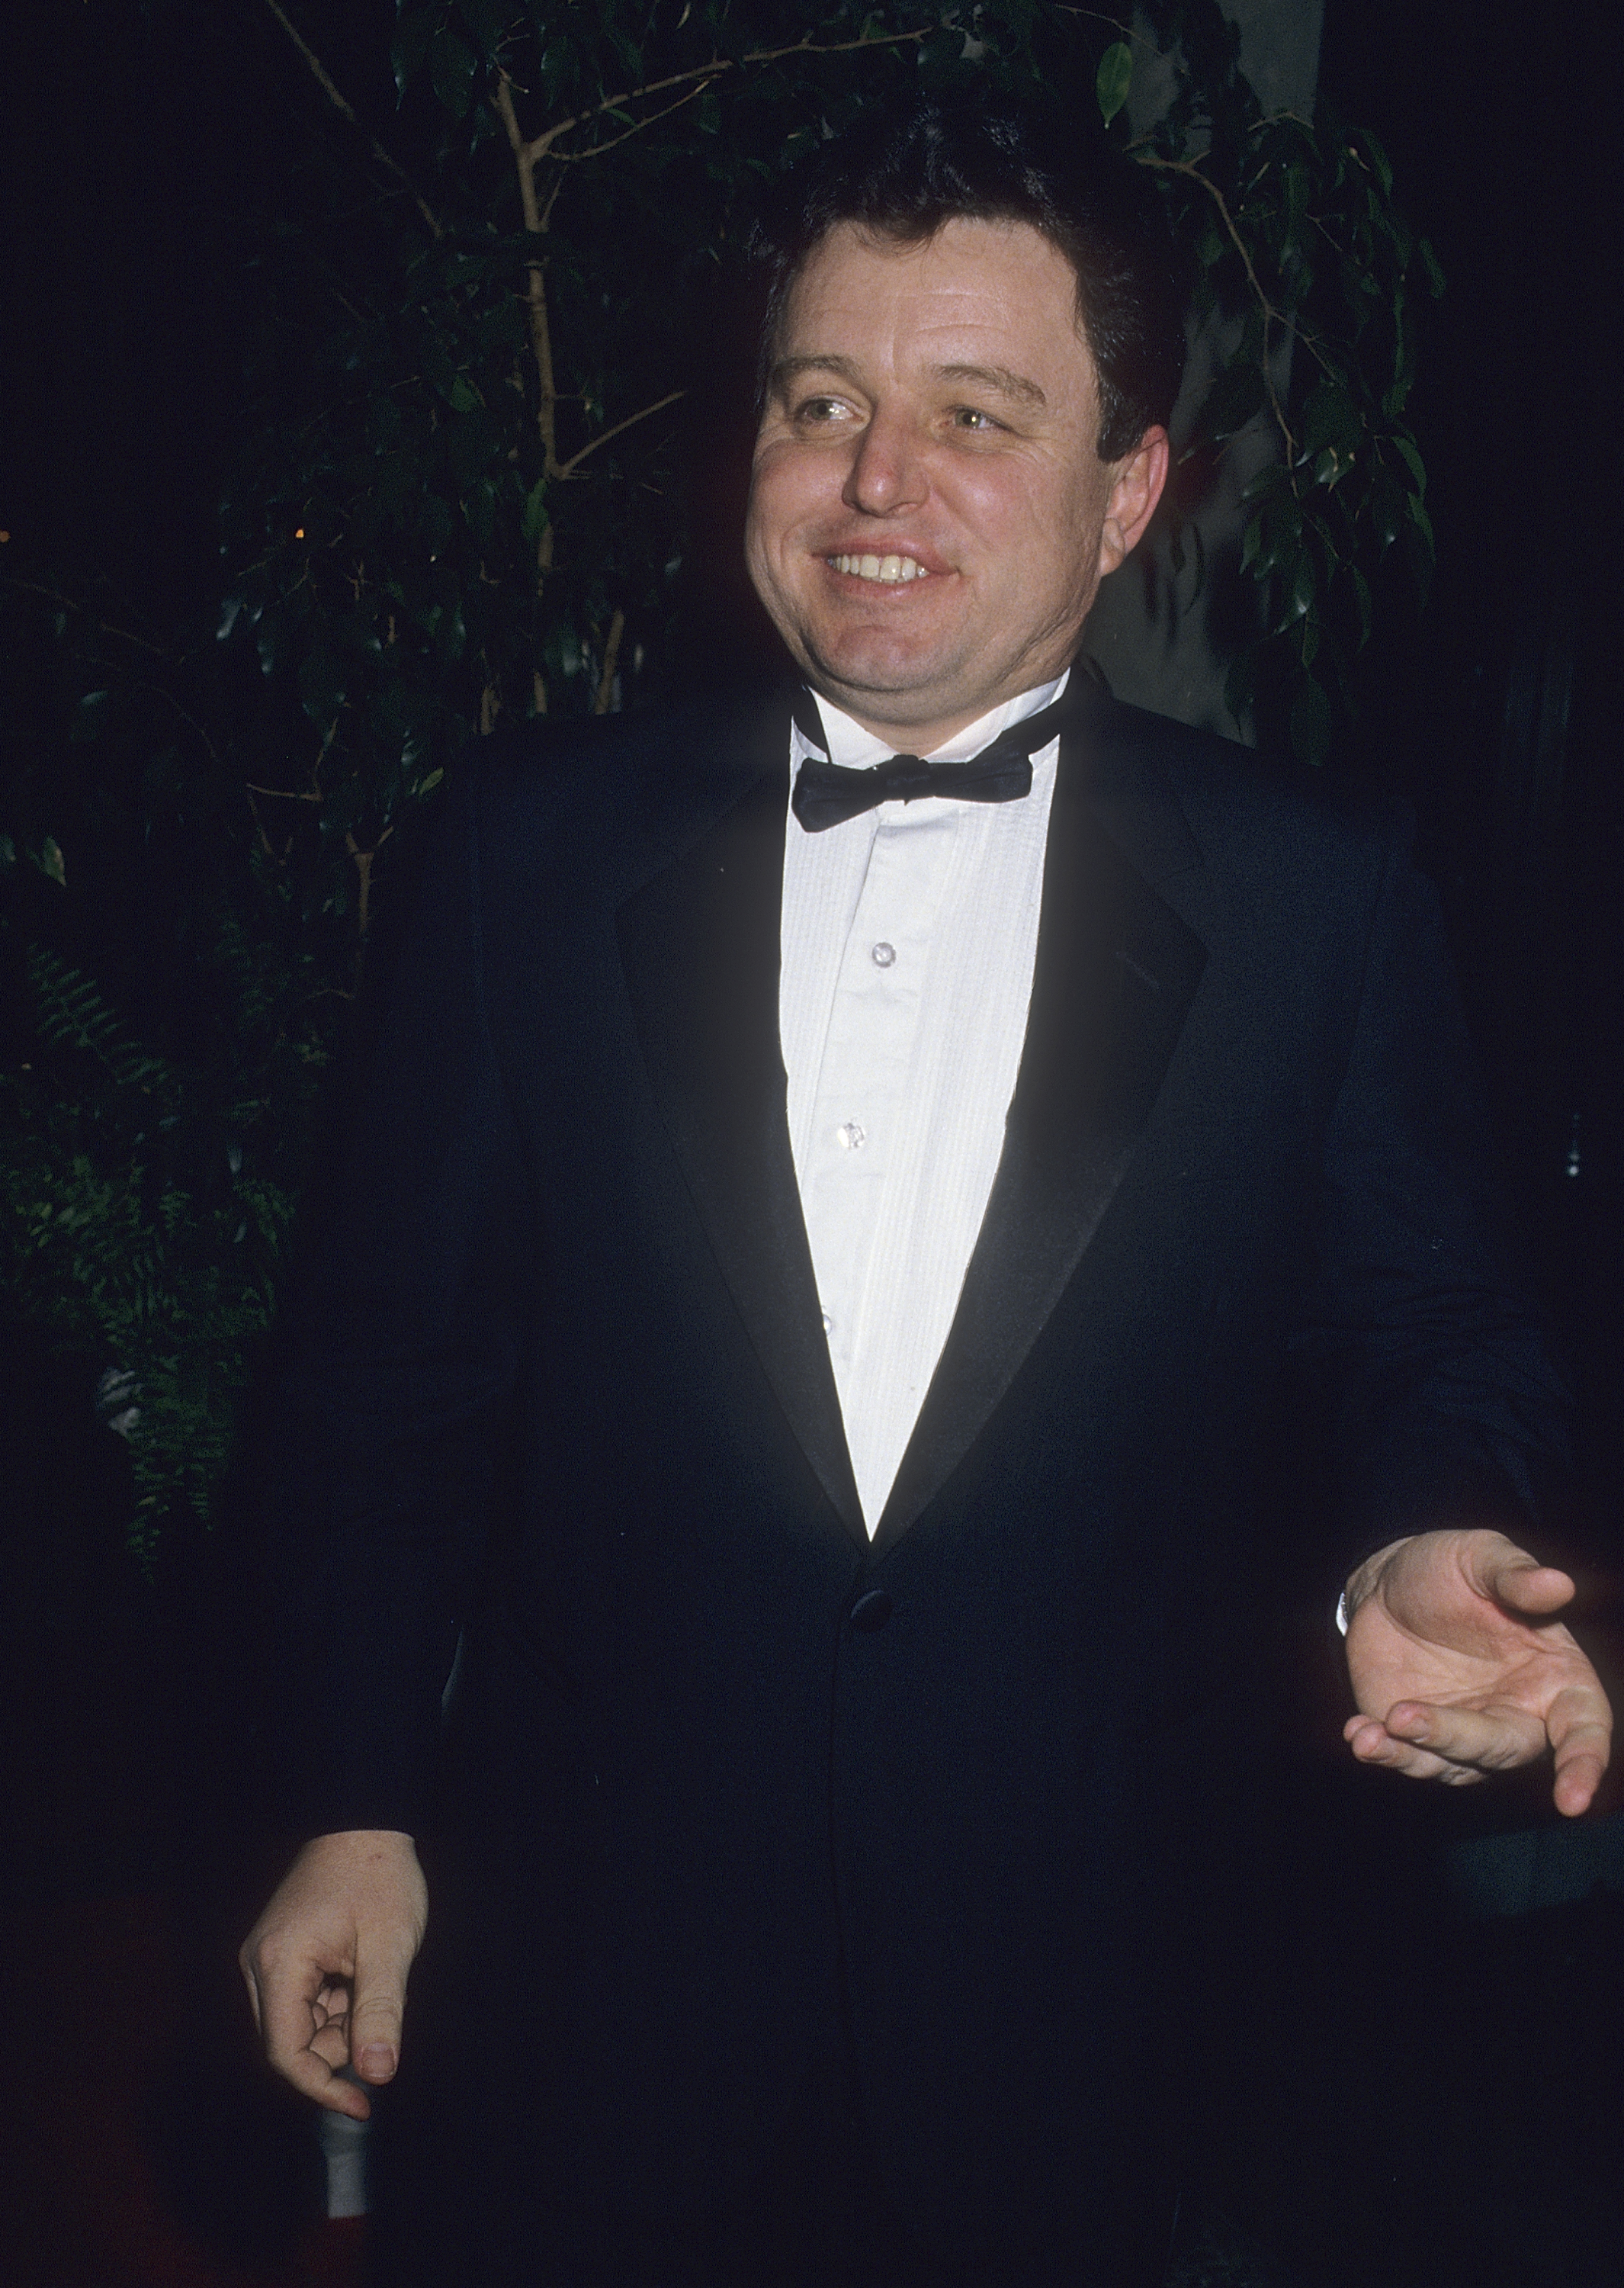 Jerry Mathers attends the Fourth Annual American Cinema Awards on January 8, 1987 in Beverly Hills, California | Source: Getty Images